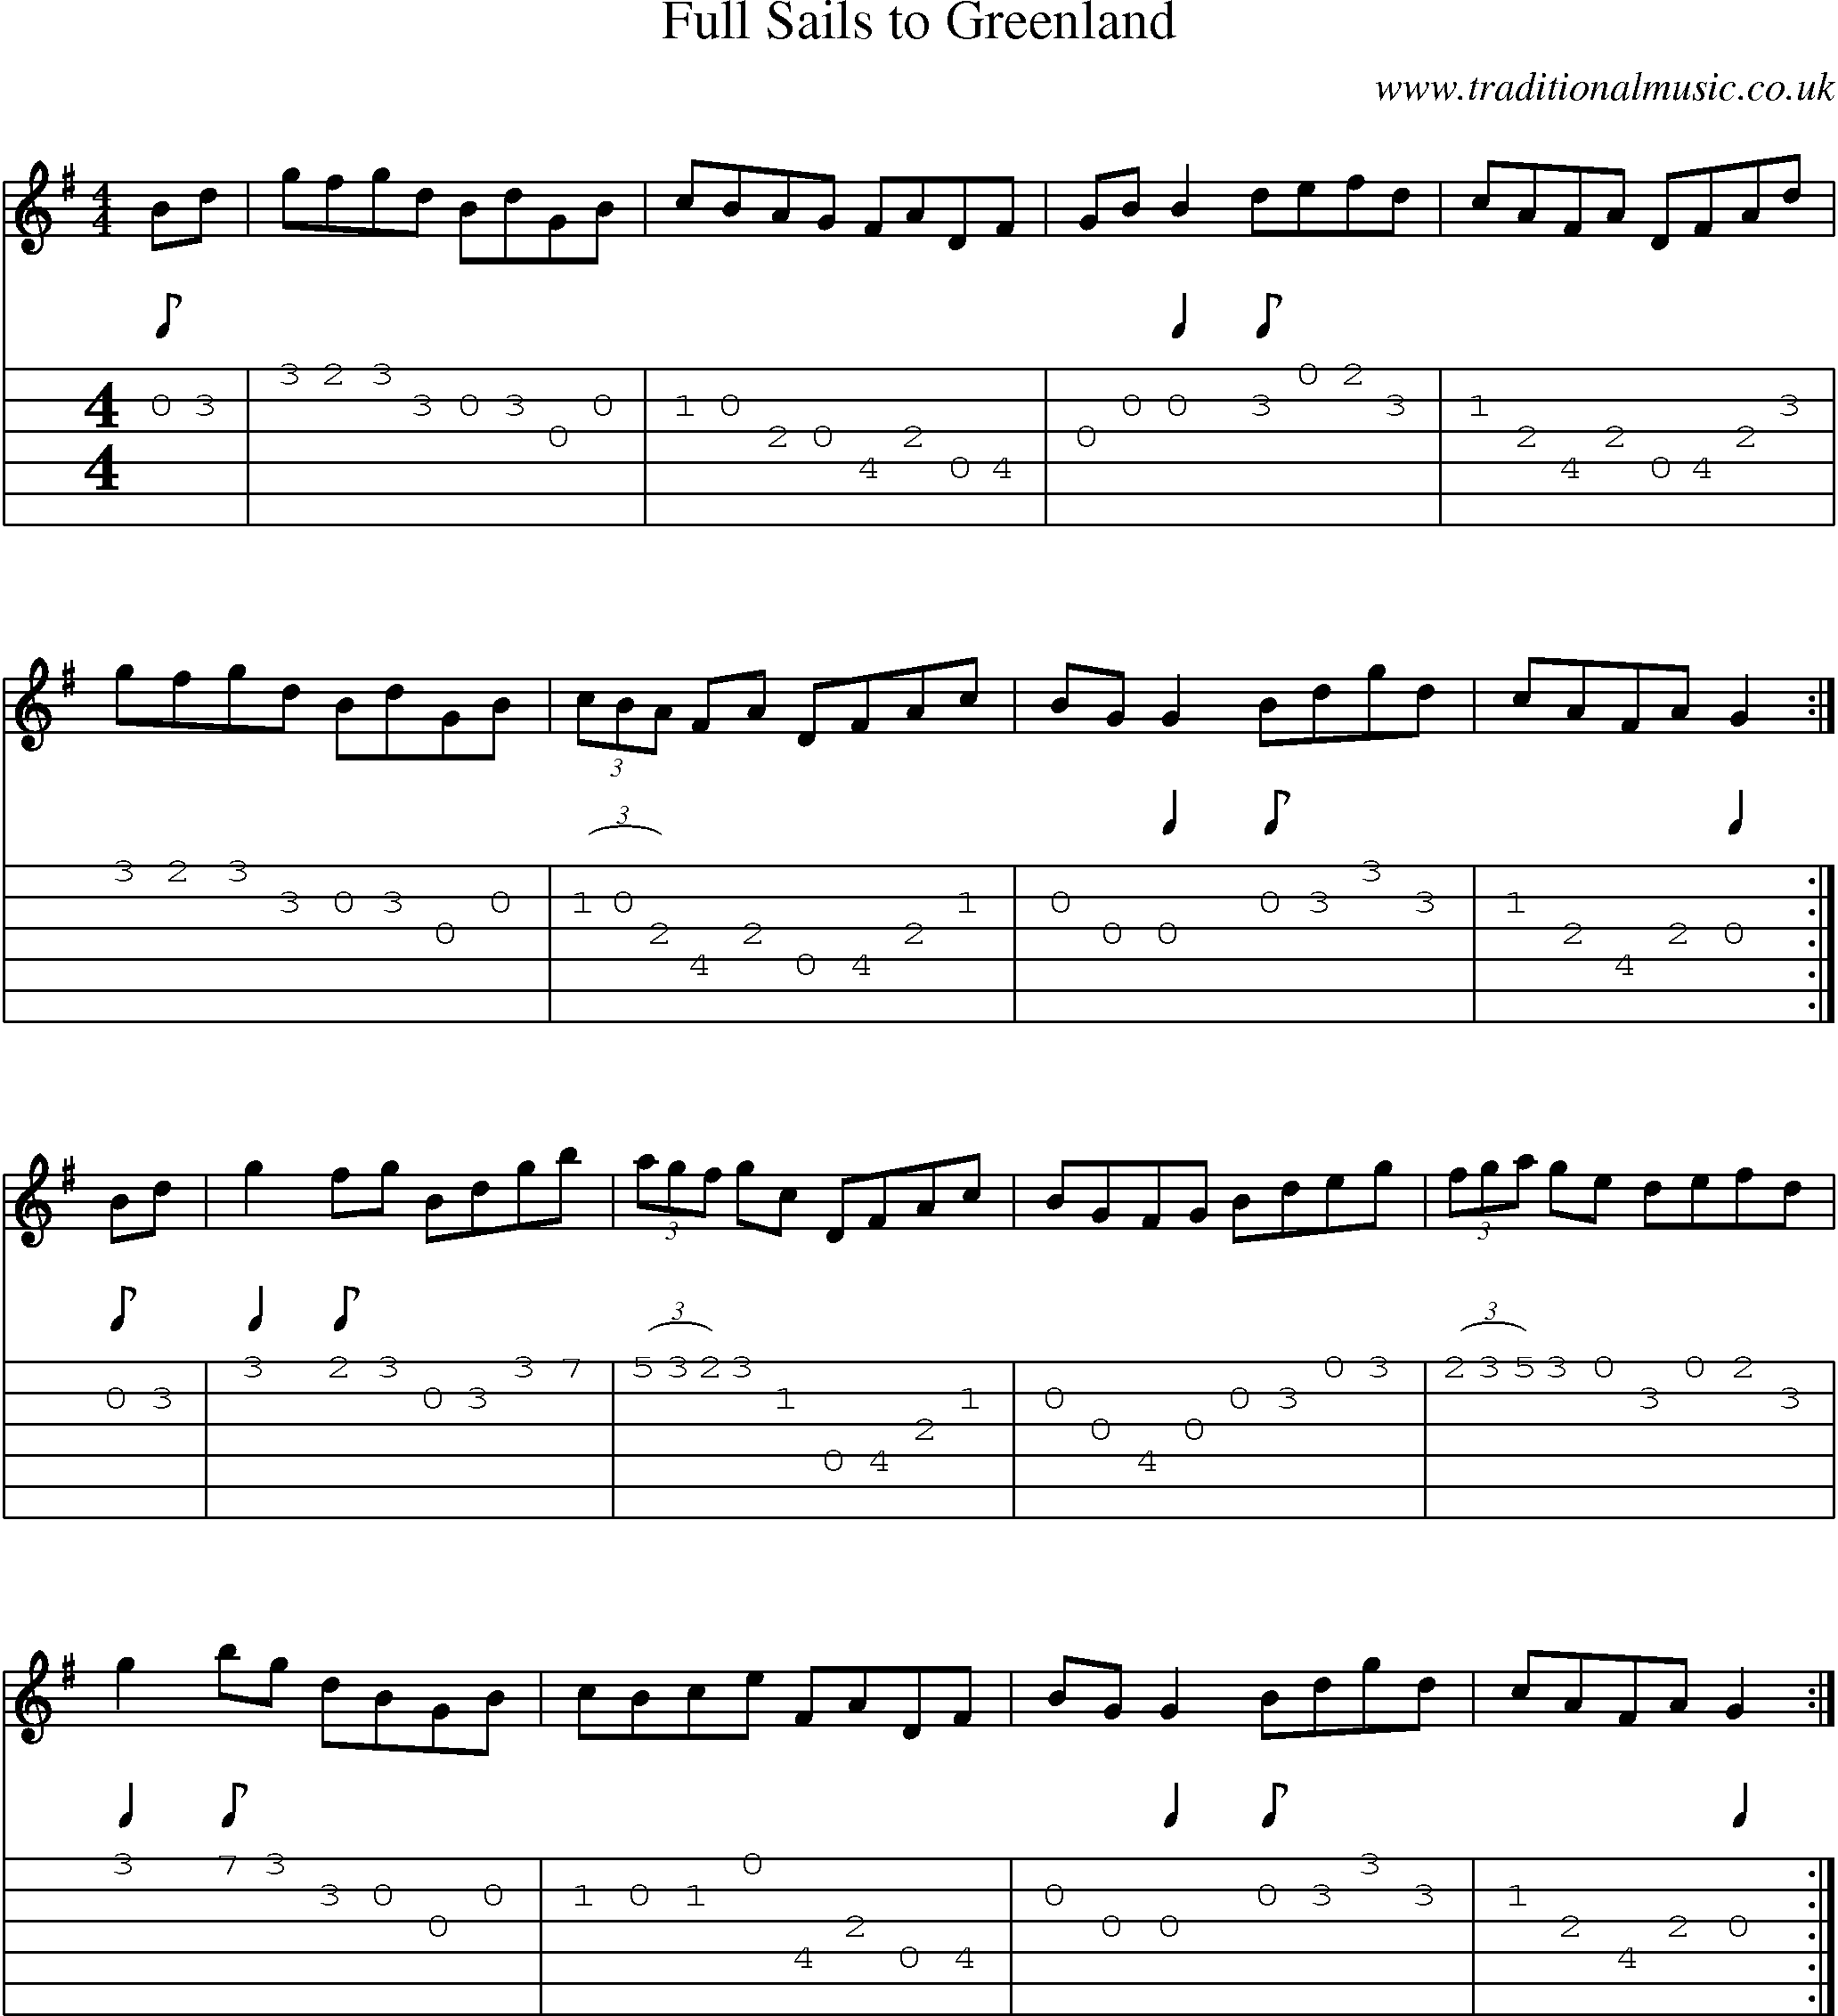 Music Score and Guitar Tabs for Full Sails To Greenland